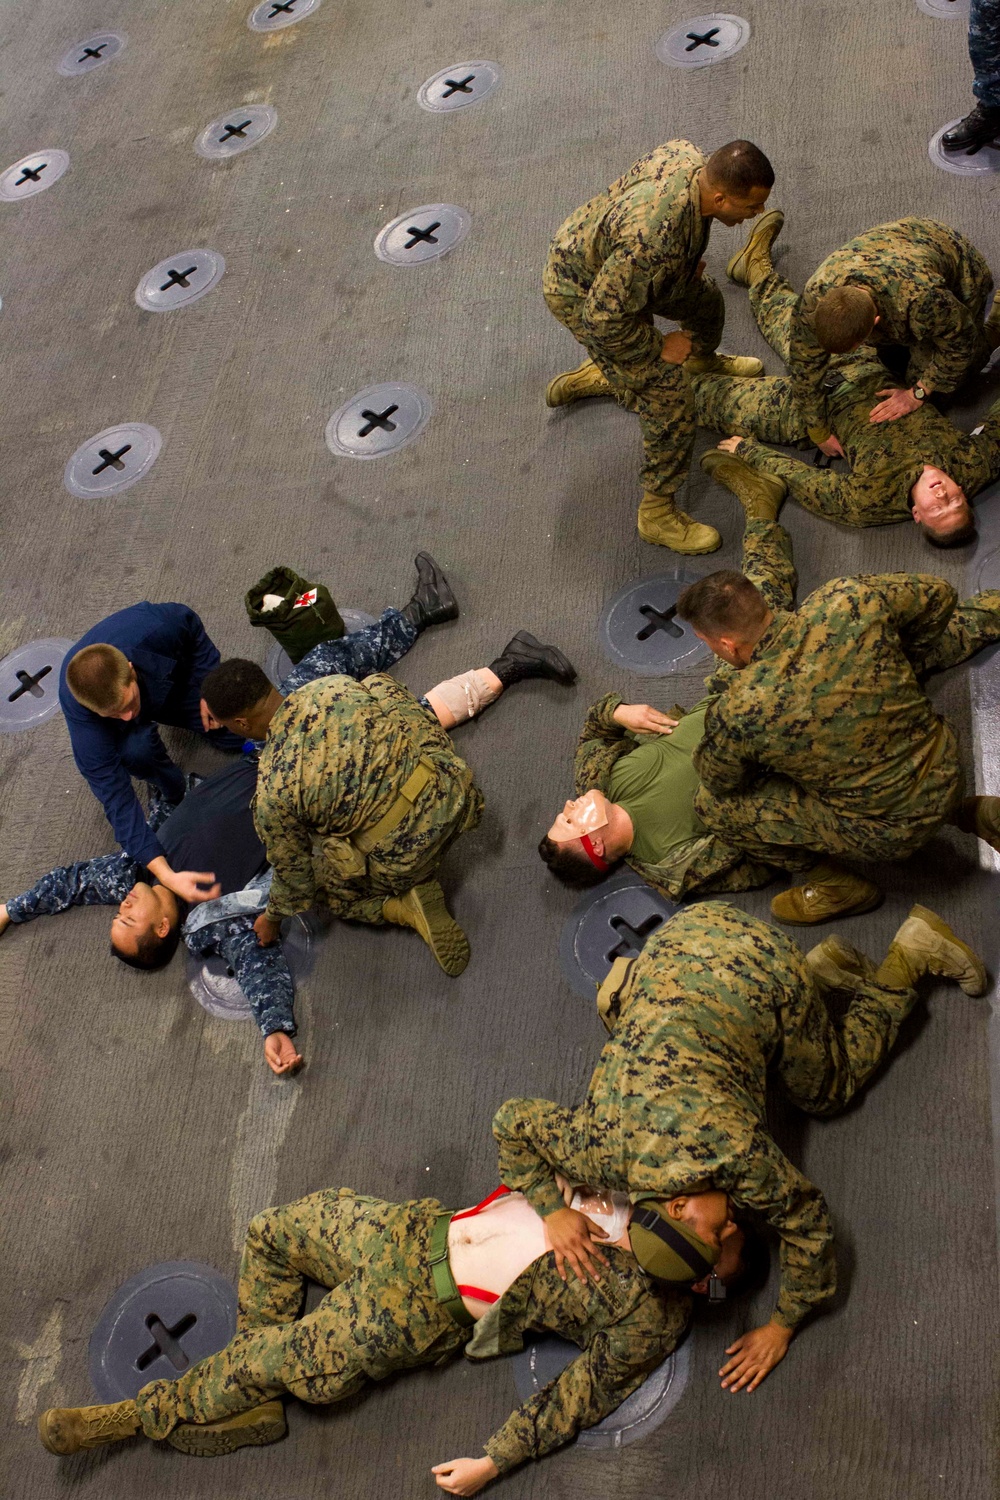 Navy-Marine Corps team takes on CLS aboard USS America